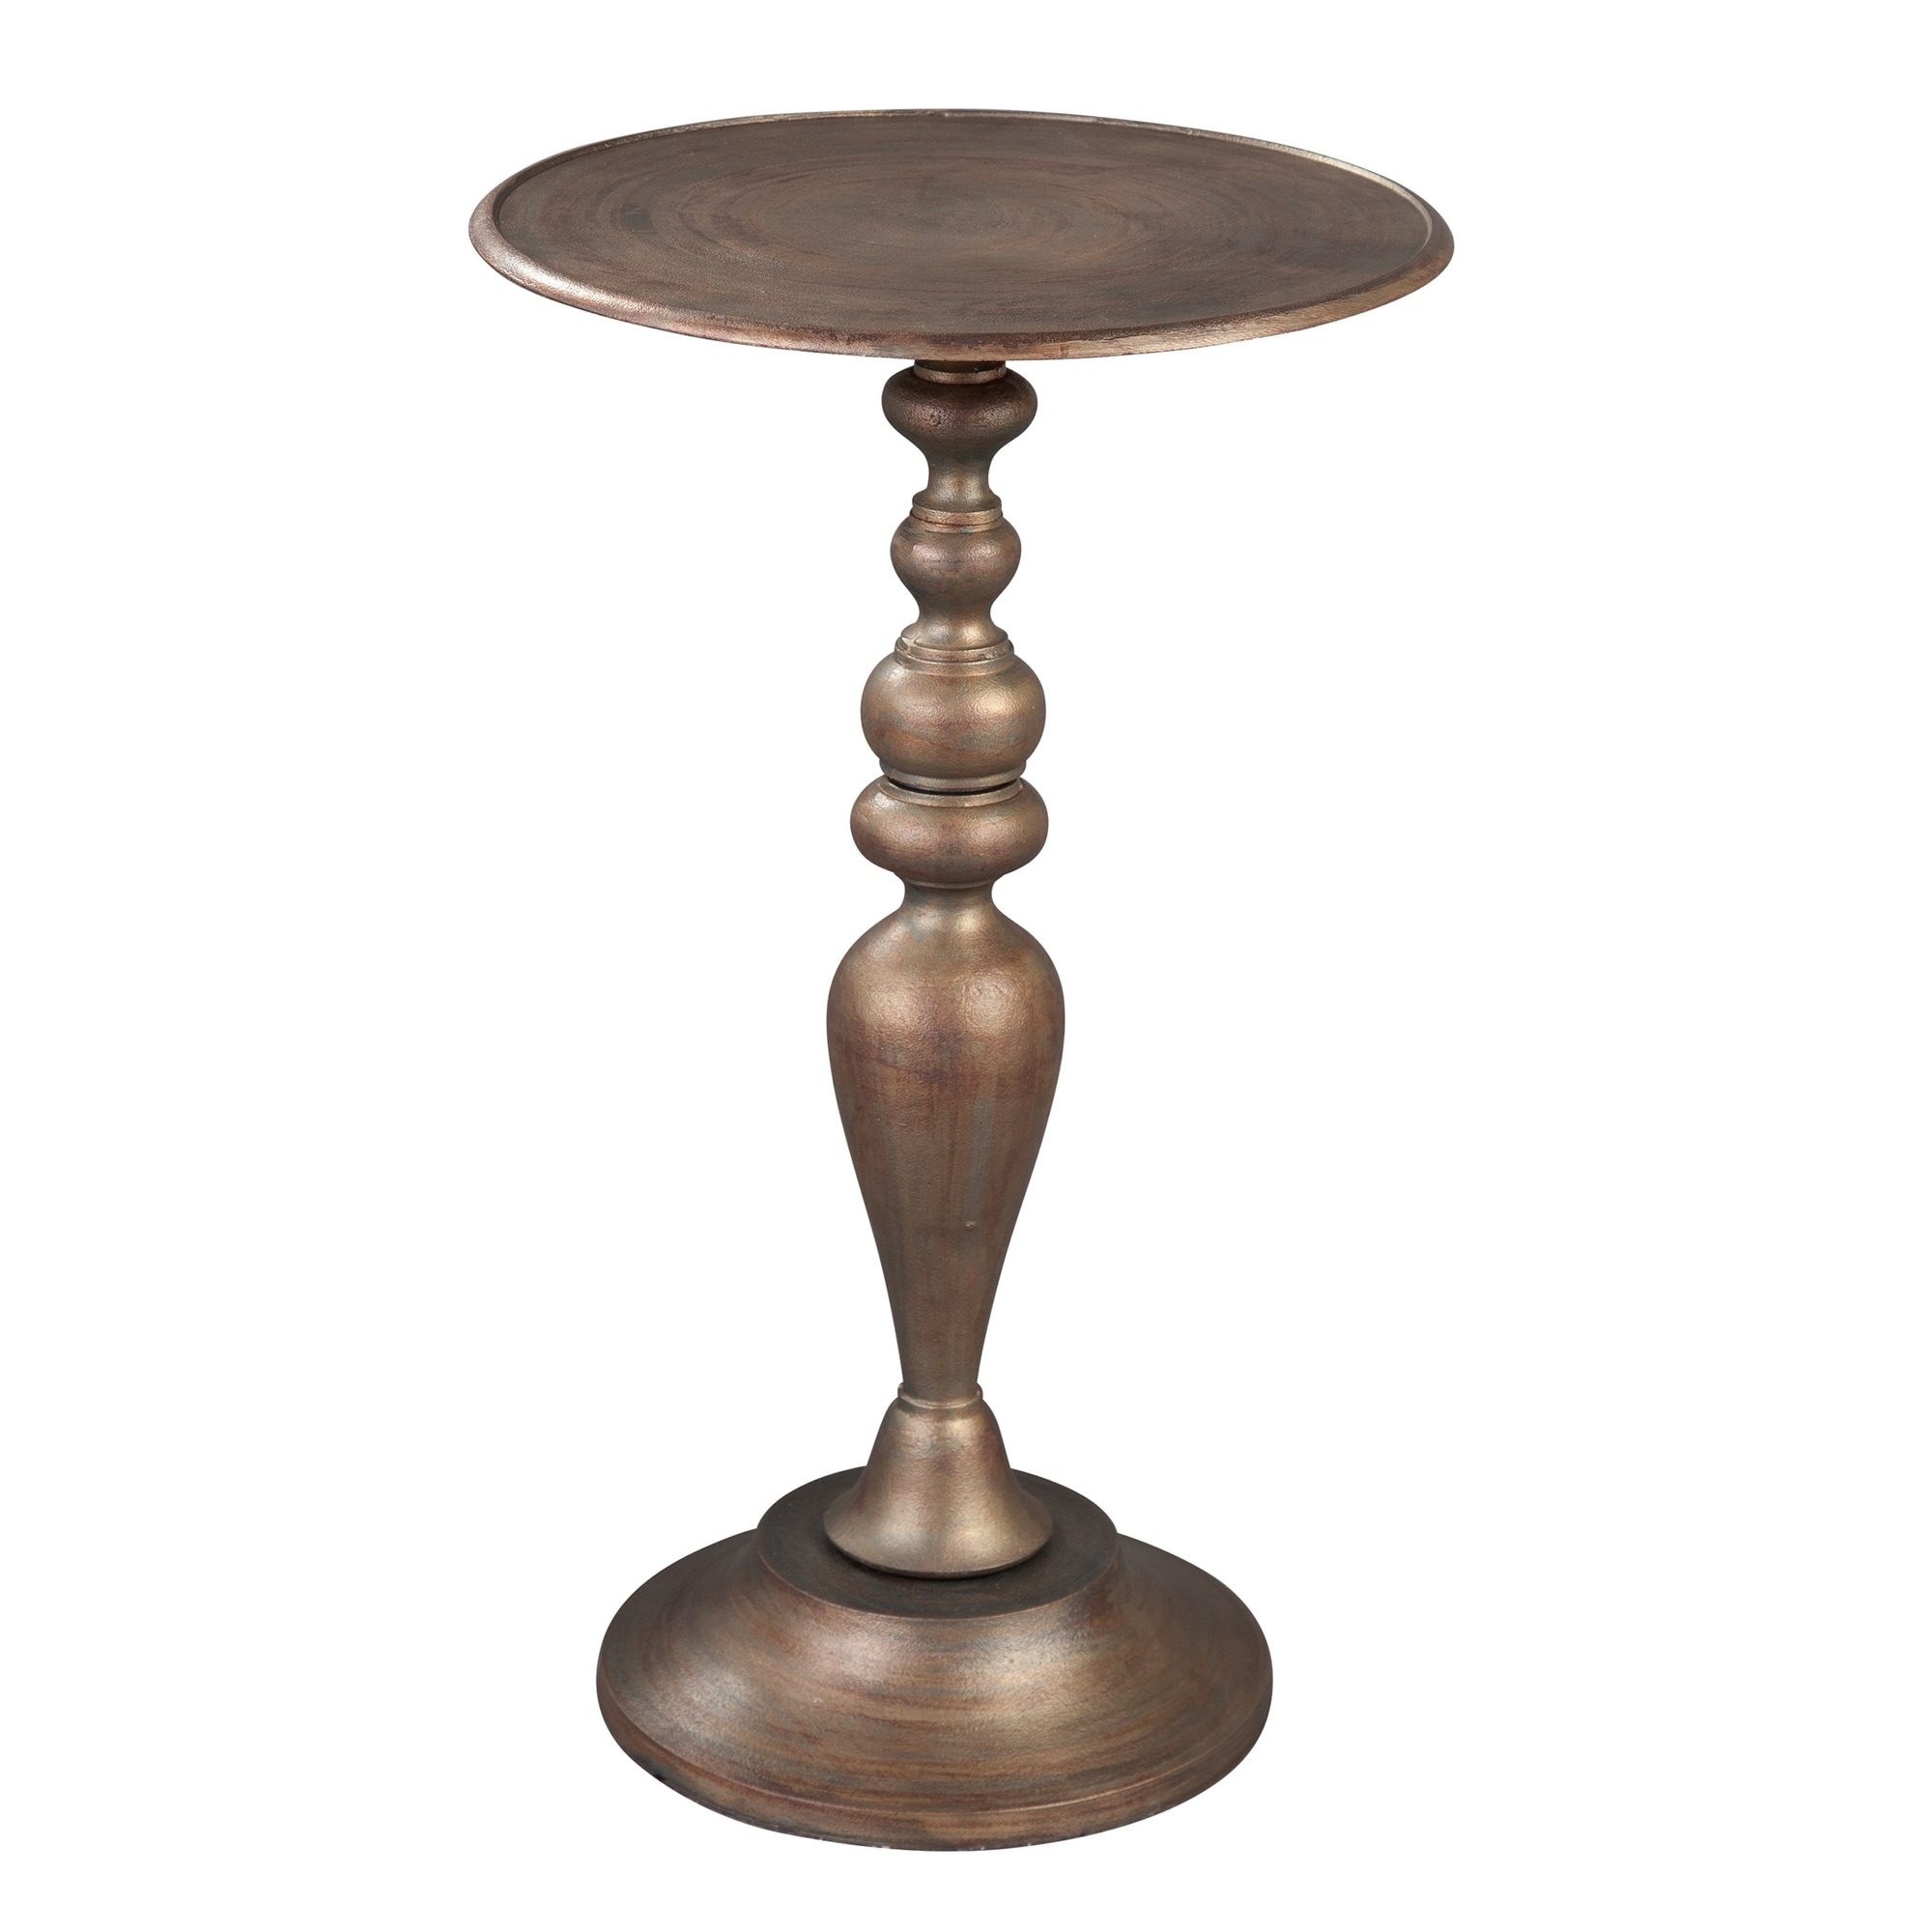 Hekman Furniture Contemporary Modern, Transitional, and Glam, Occasional, Accent, Antique Brass Side Table, Mesa Pequea